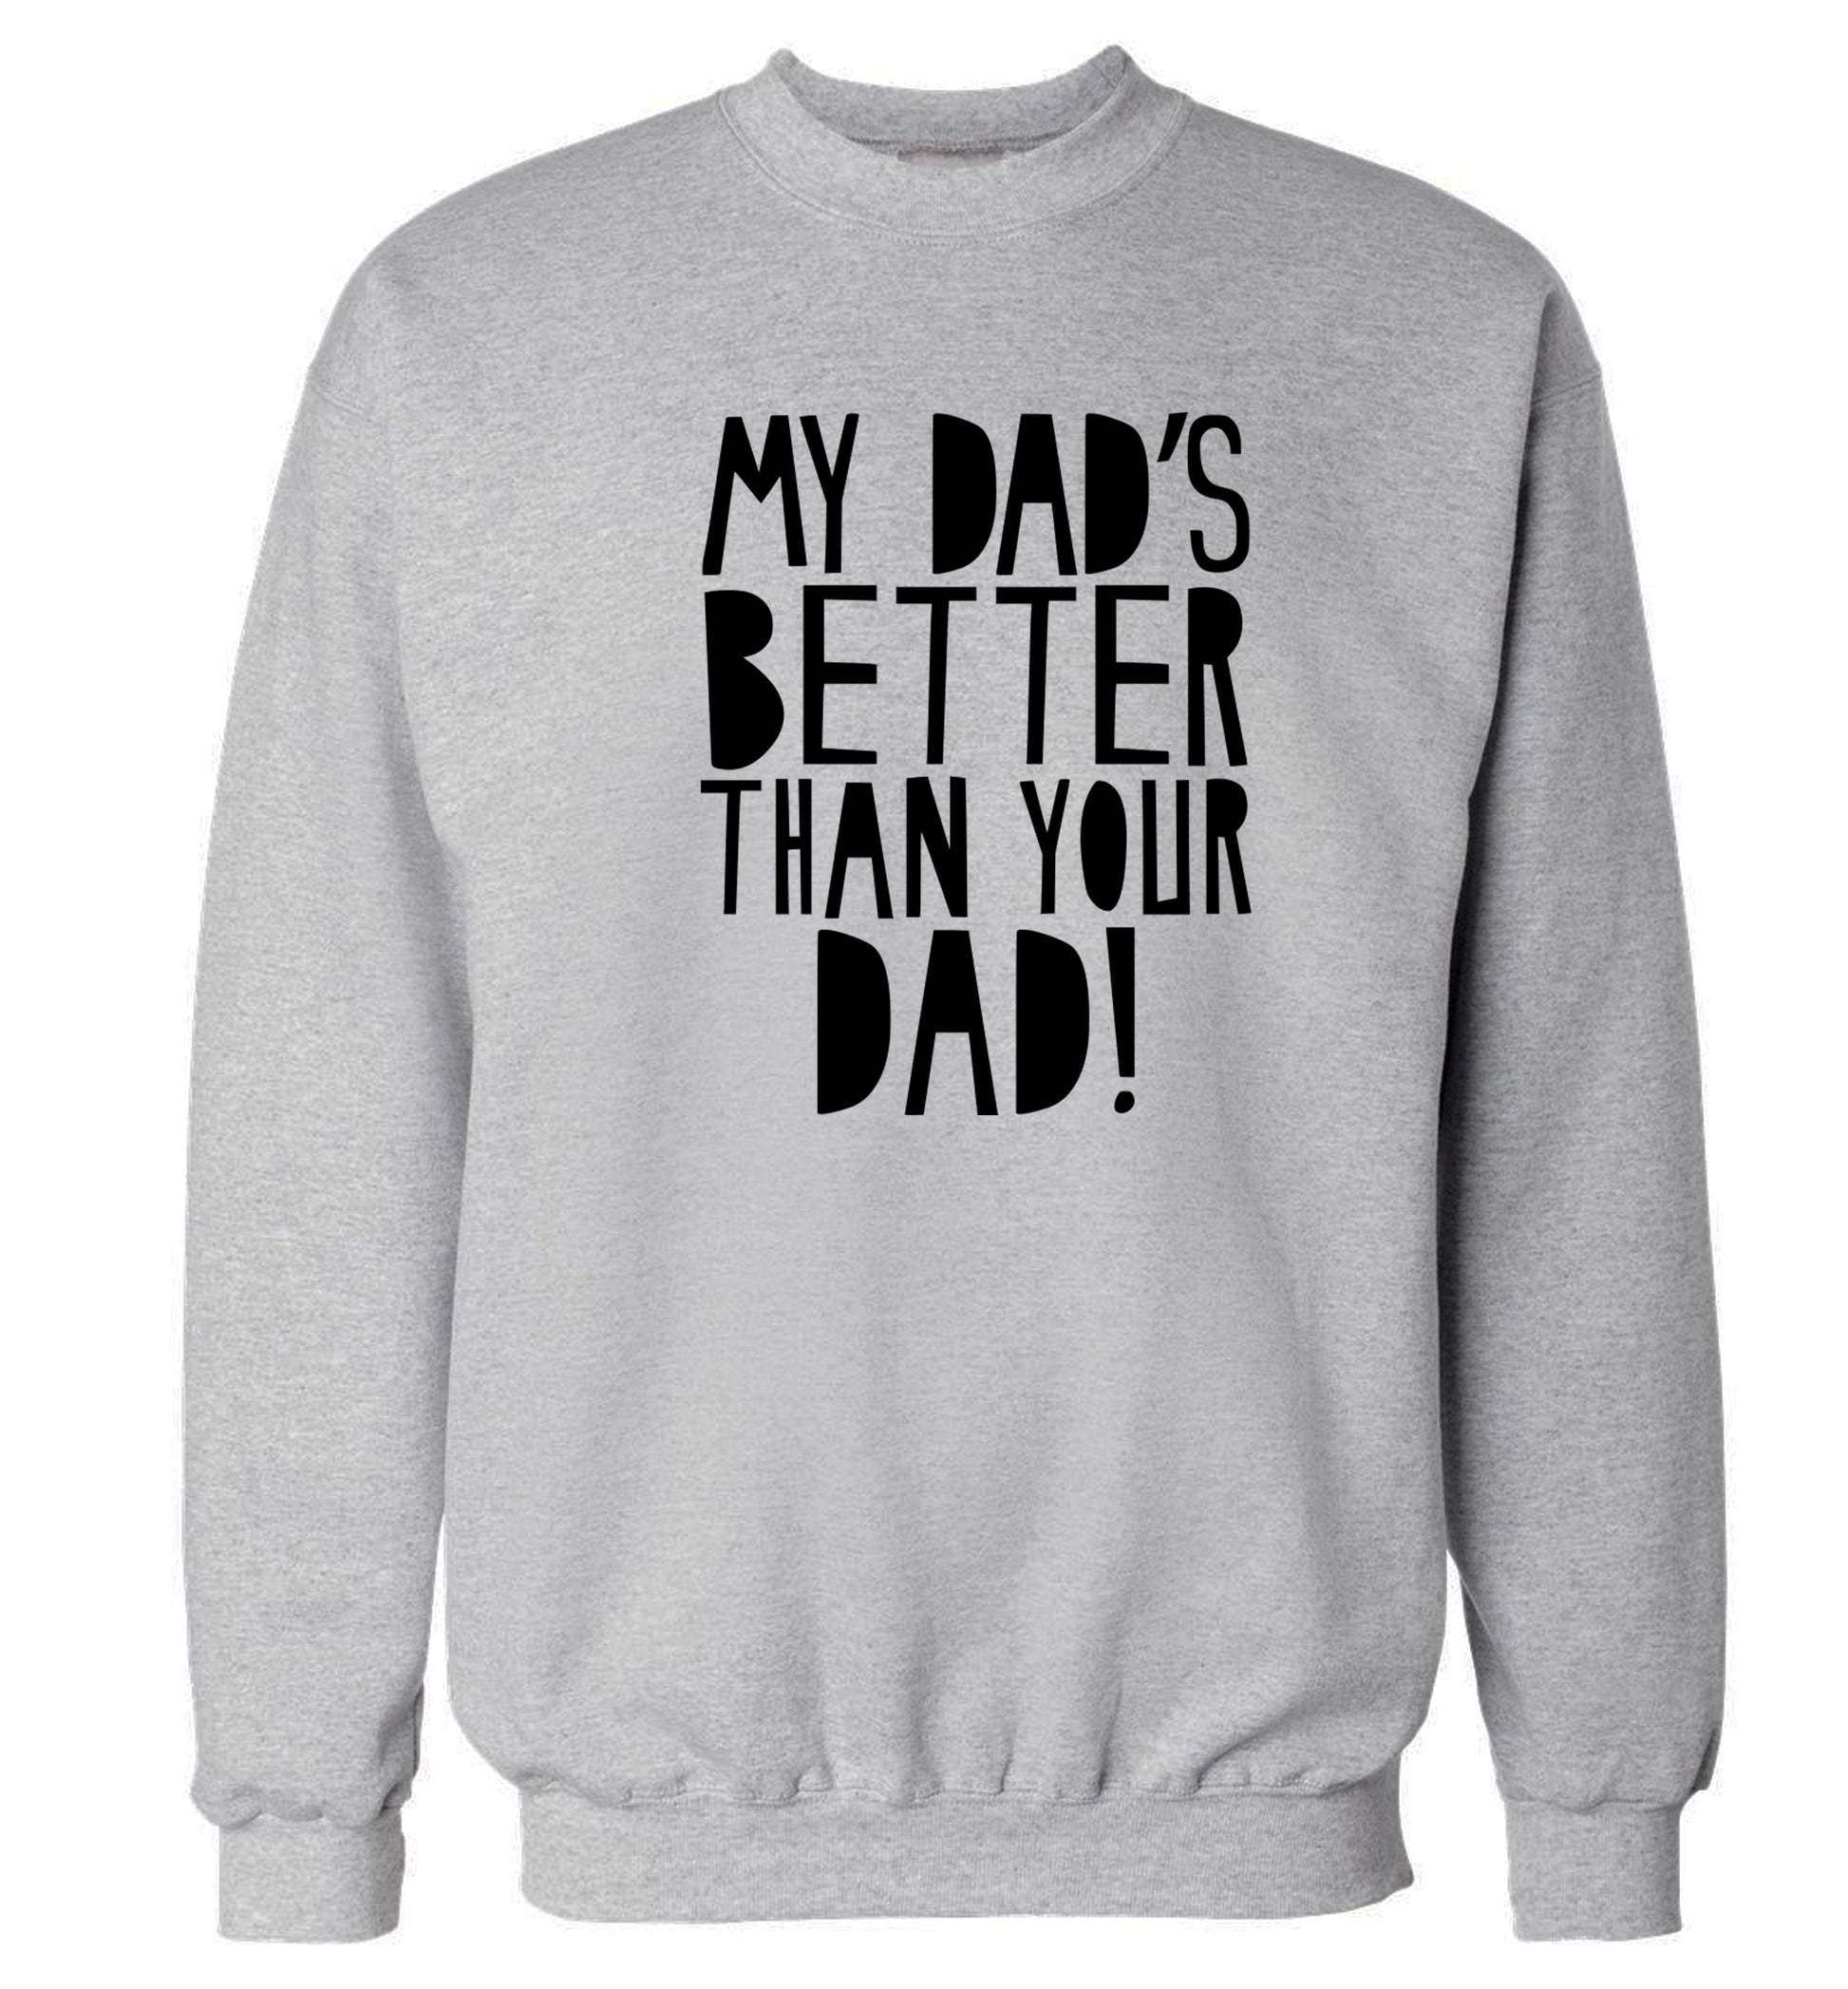 My dad's better than your dad Adult's unisex grey Sweater 2XL